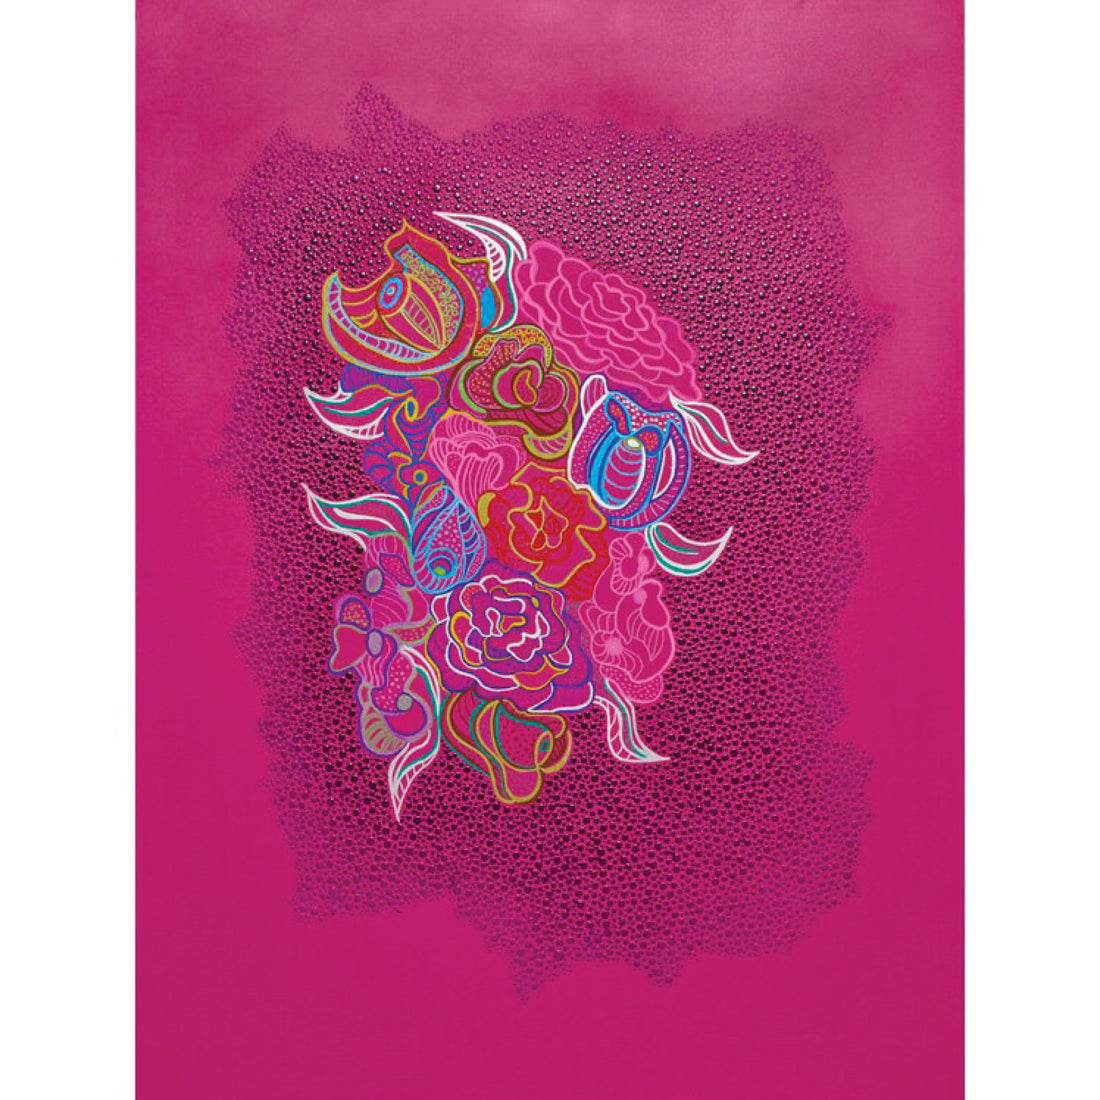 Mais Al-Sheikhly "In the Bloom-Pink" abstract painting Canadian Artist Kefi Art Gallery